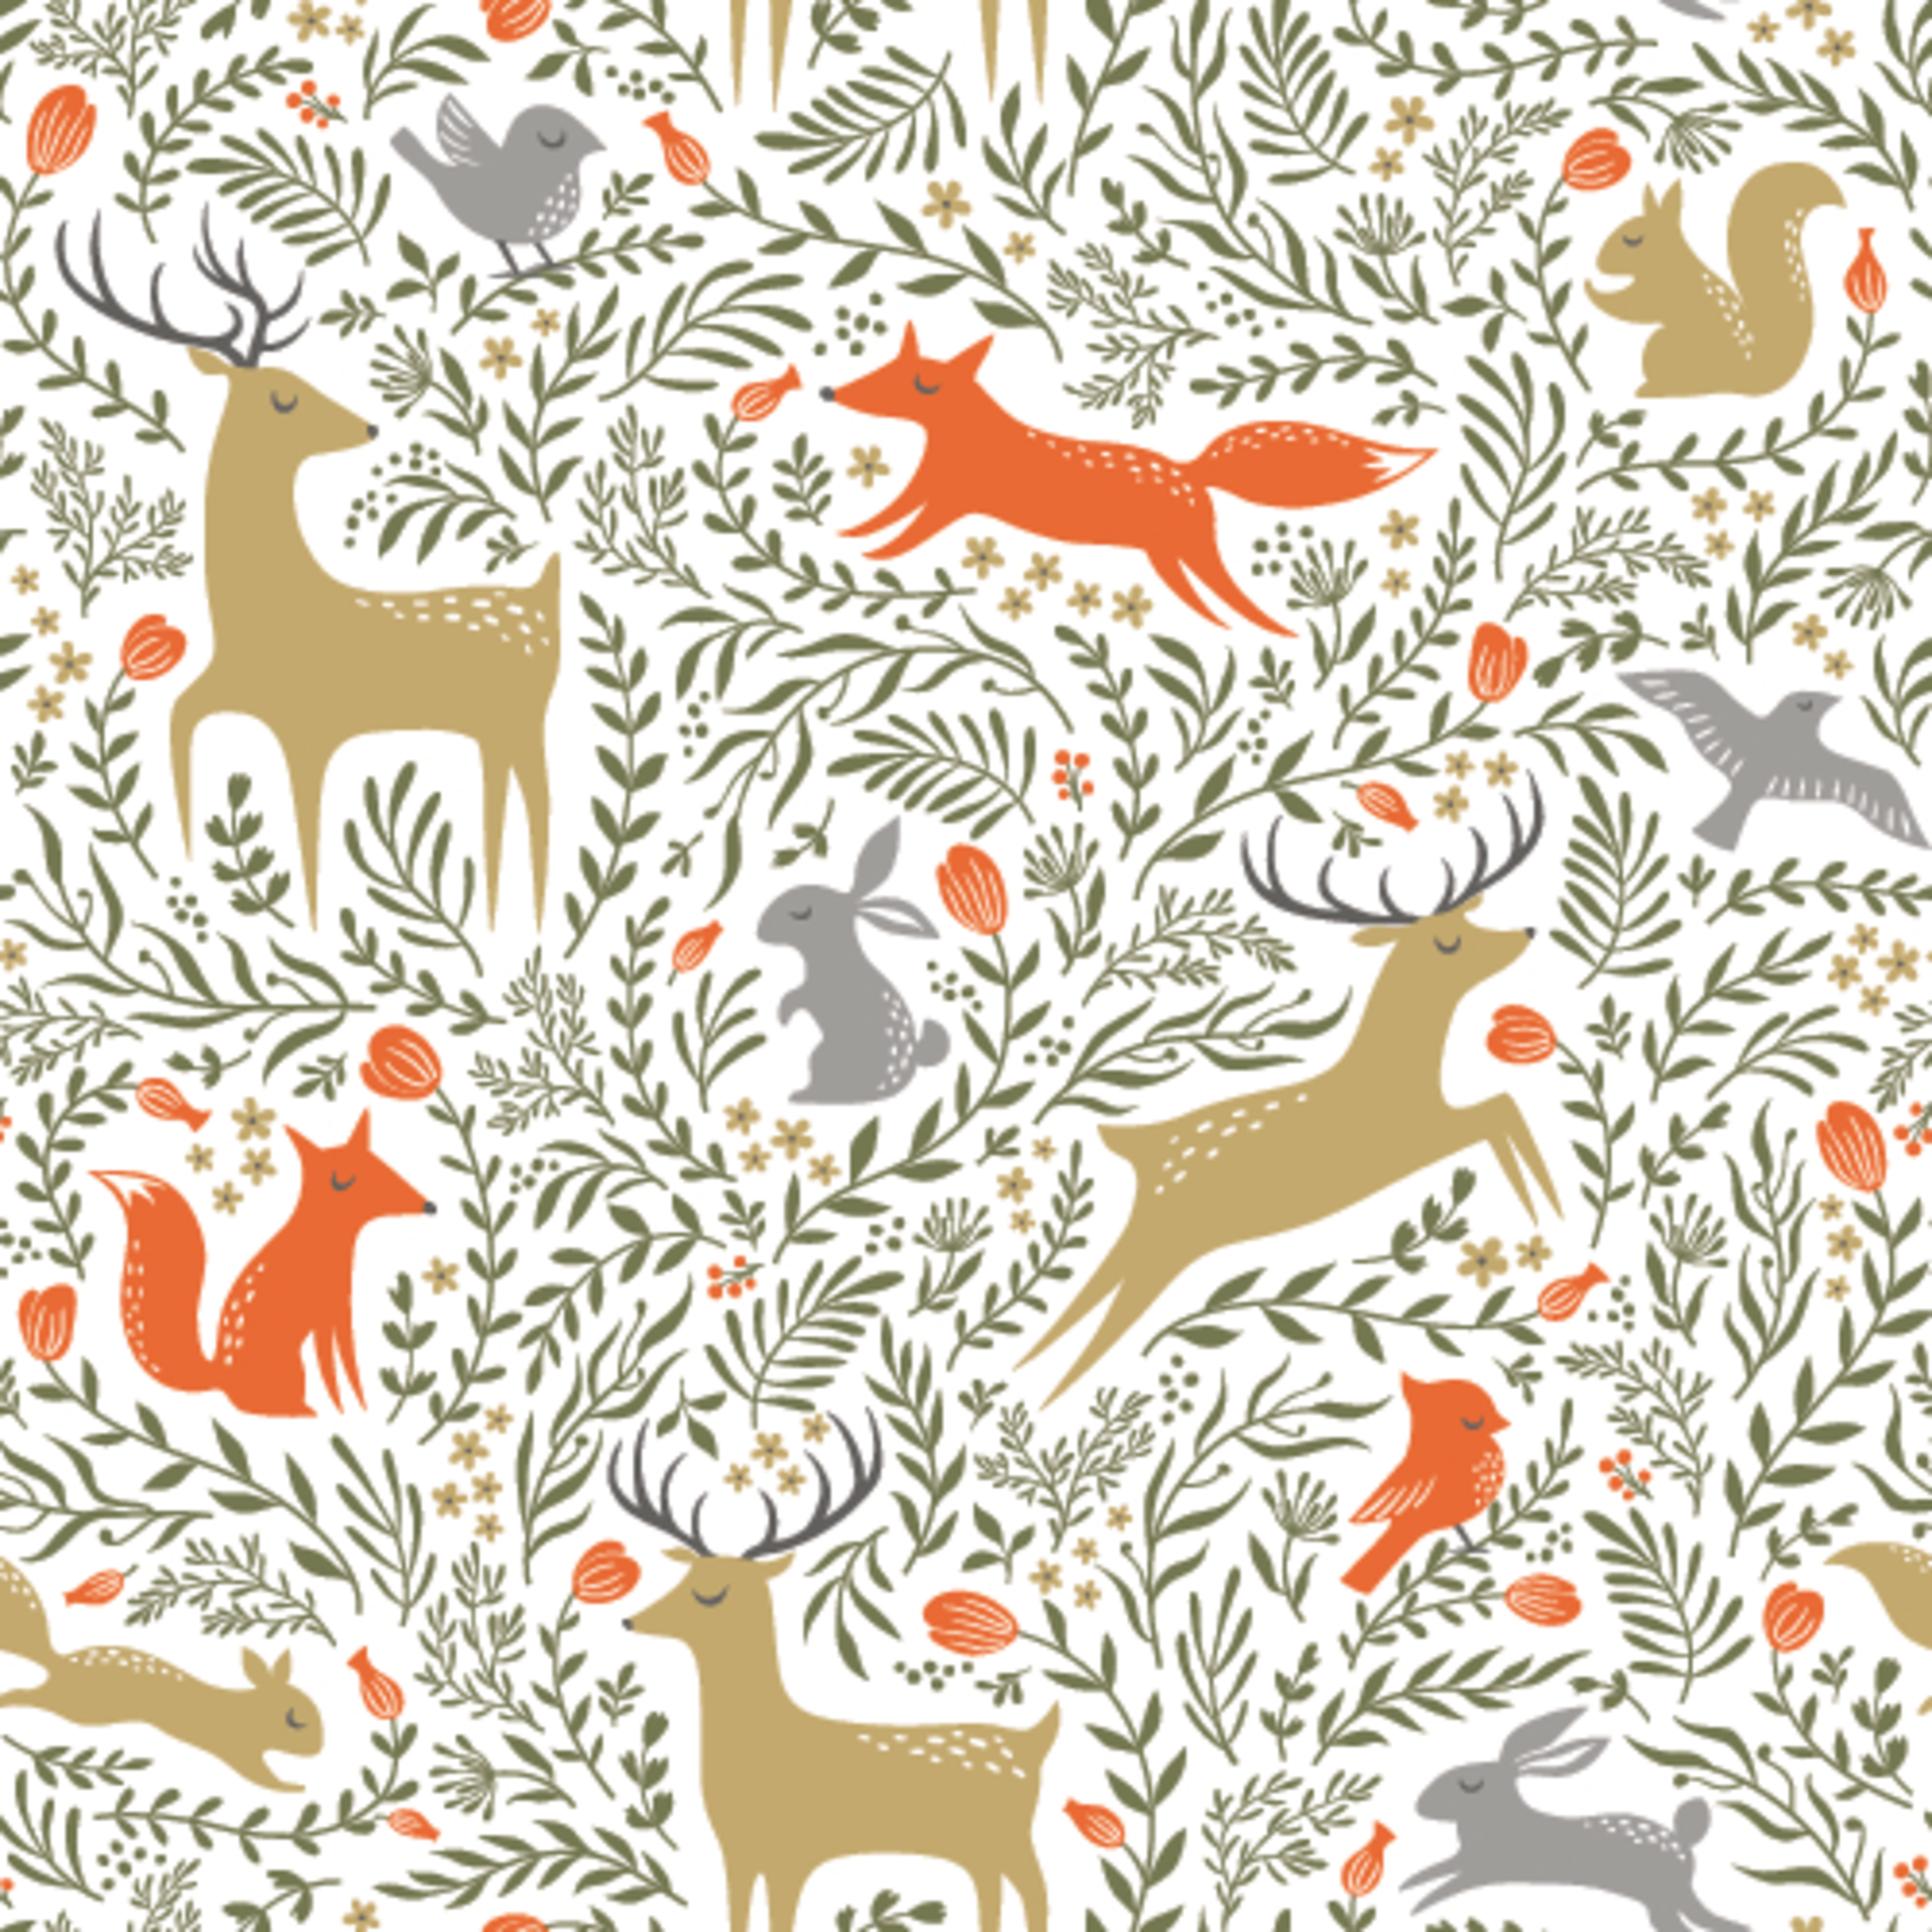 Watercolor Woodland Animal Scandinavian Seamless Pattern Fabric Wallpaper  Background With Owl Hedgehog Fox And Butterfly Rabbit Forest Squirrel And  Chipmunk Bear And Bird Baby Animal Stock Illustration  Download Image Now   iStock